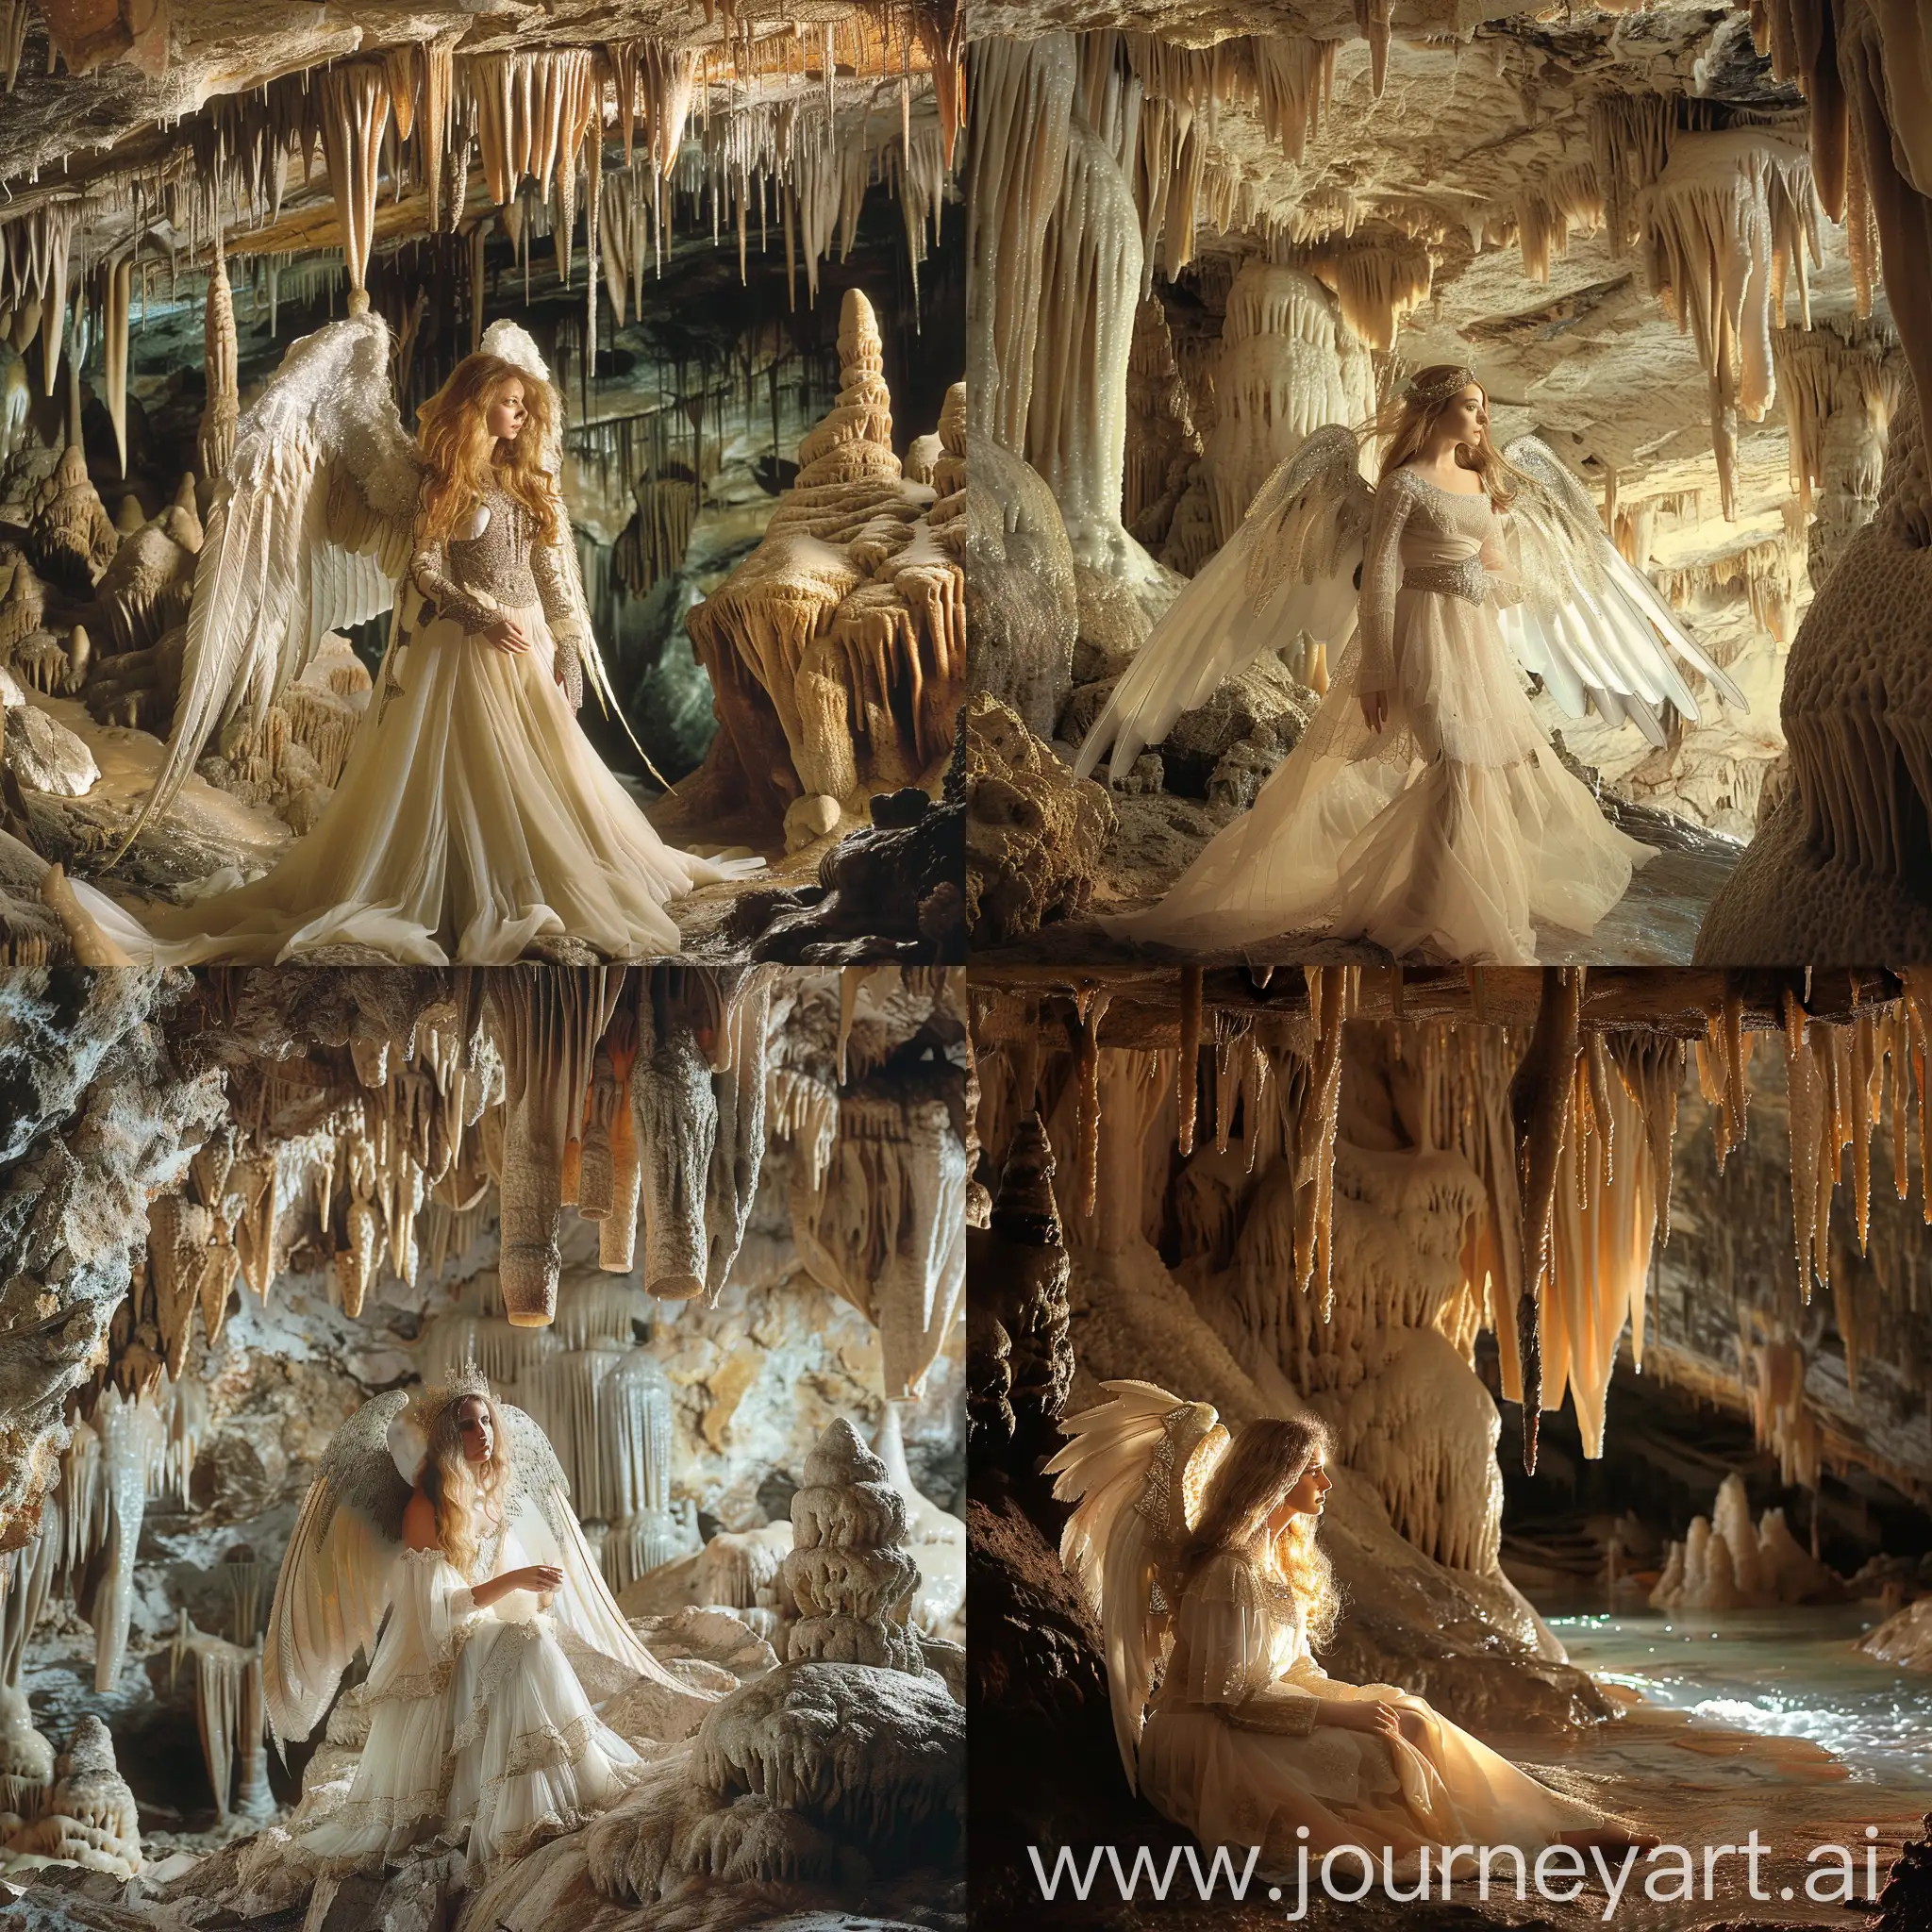 Medieval-Angel-Woman-in-Cave-with-Stalactites-and-Stalagmites